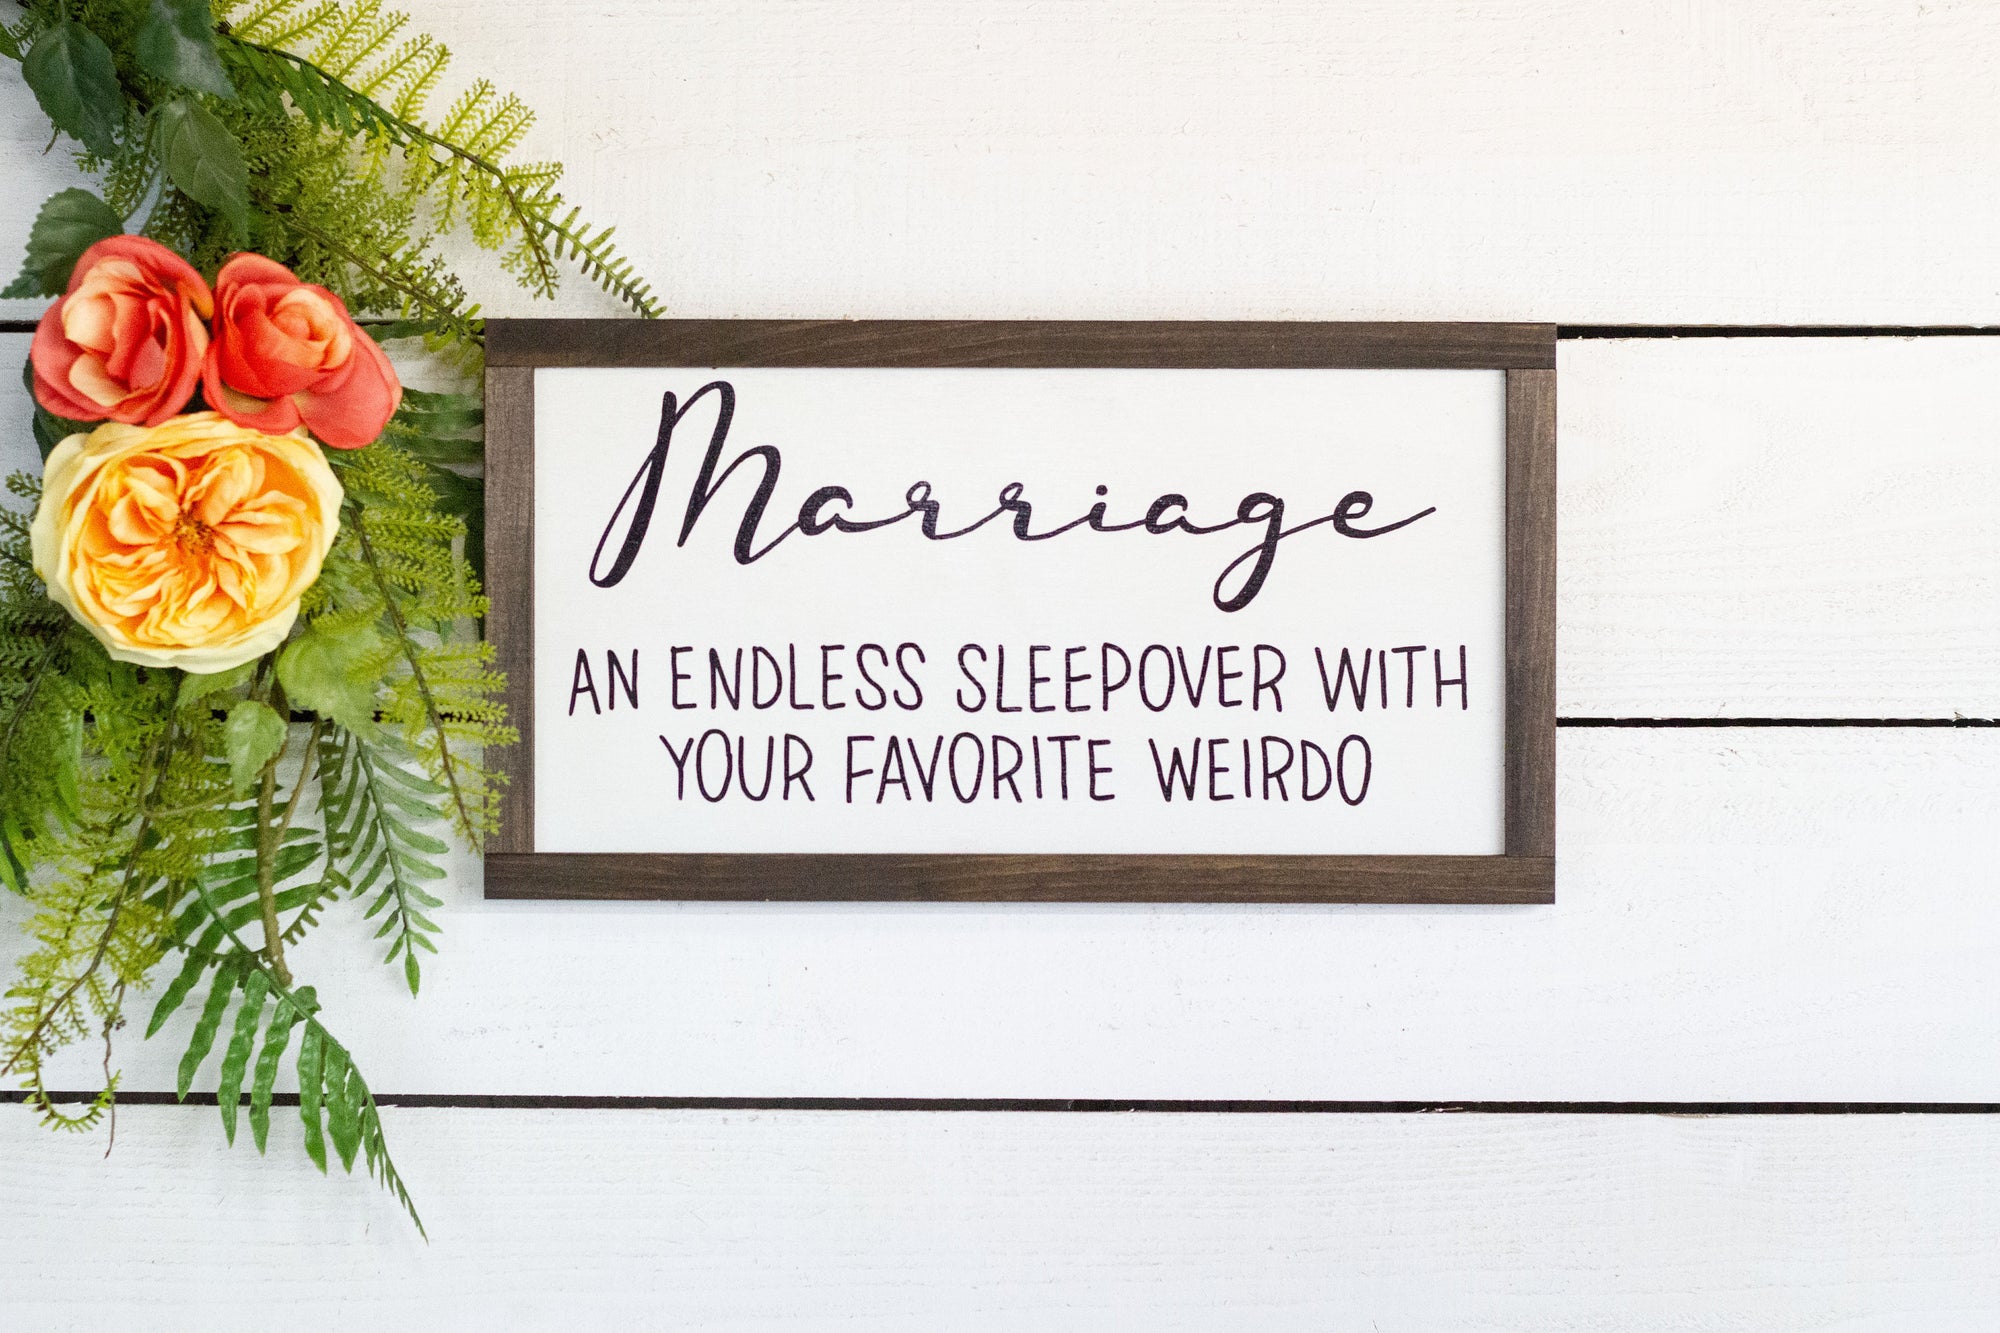 Marriage an endless sleepover with your favorite weirdo